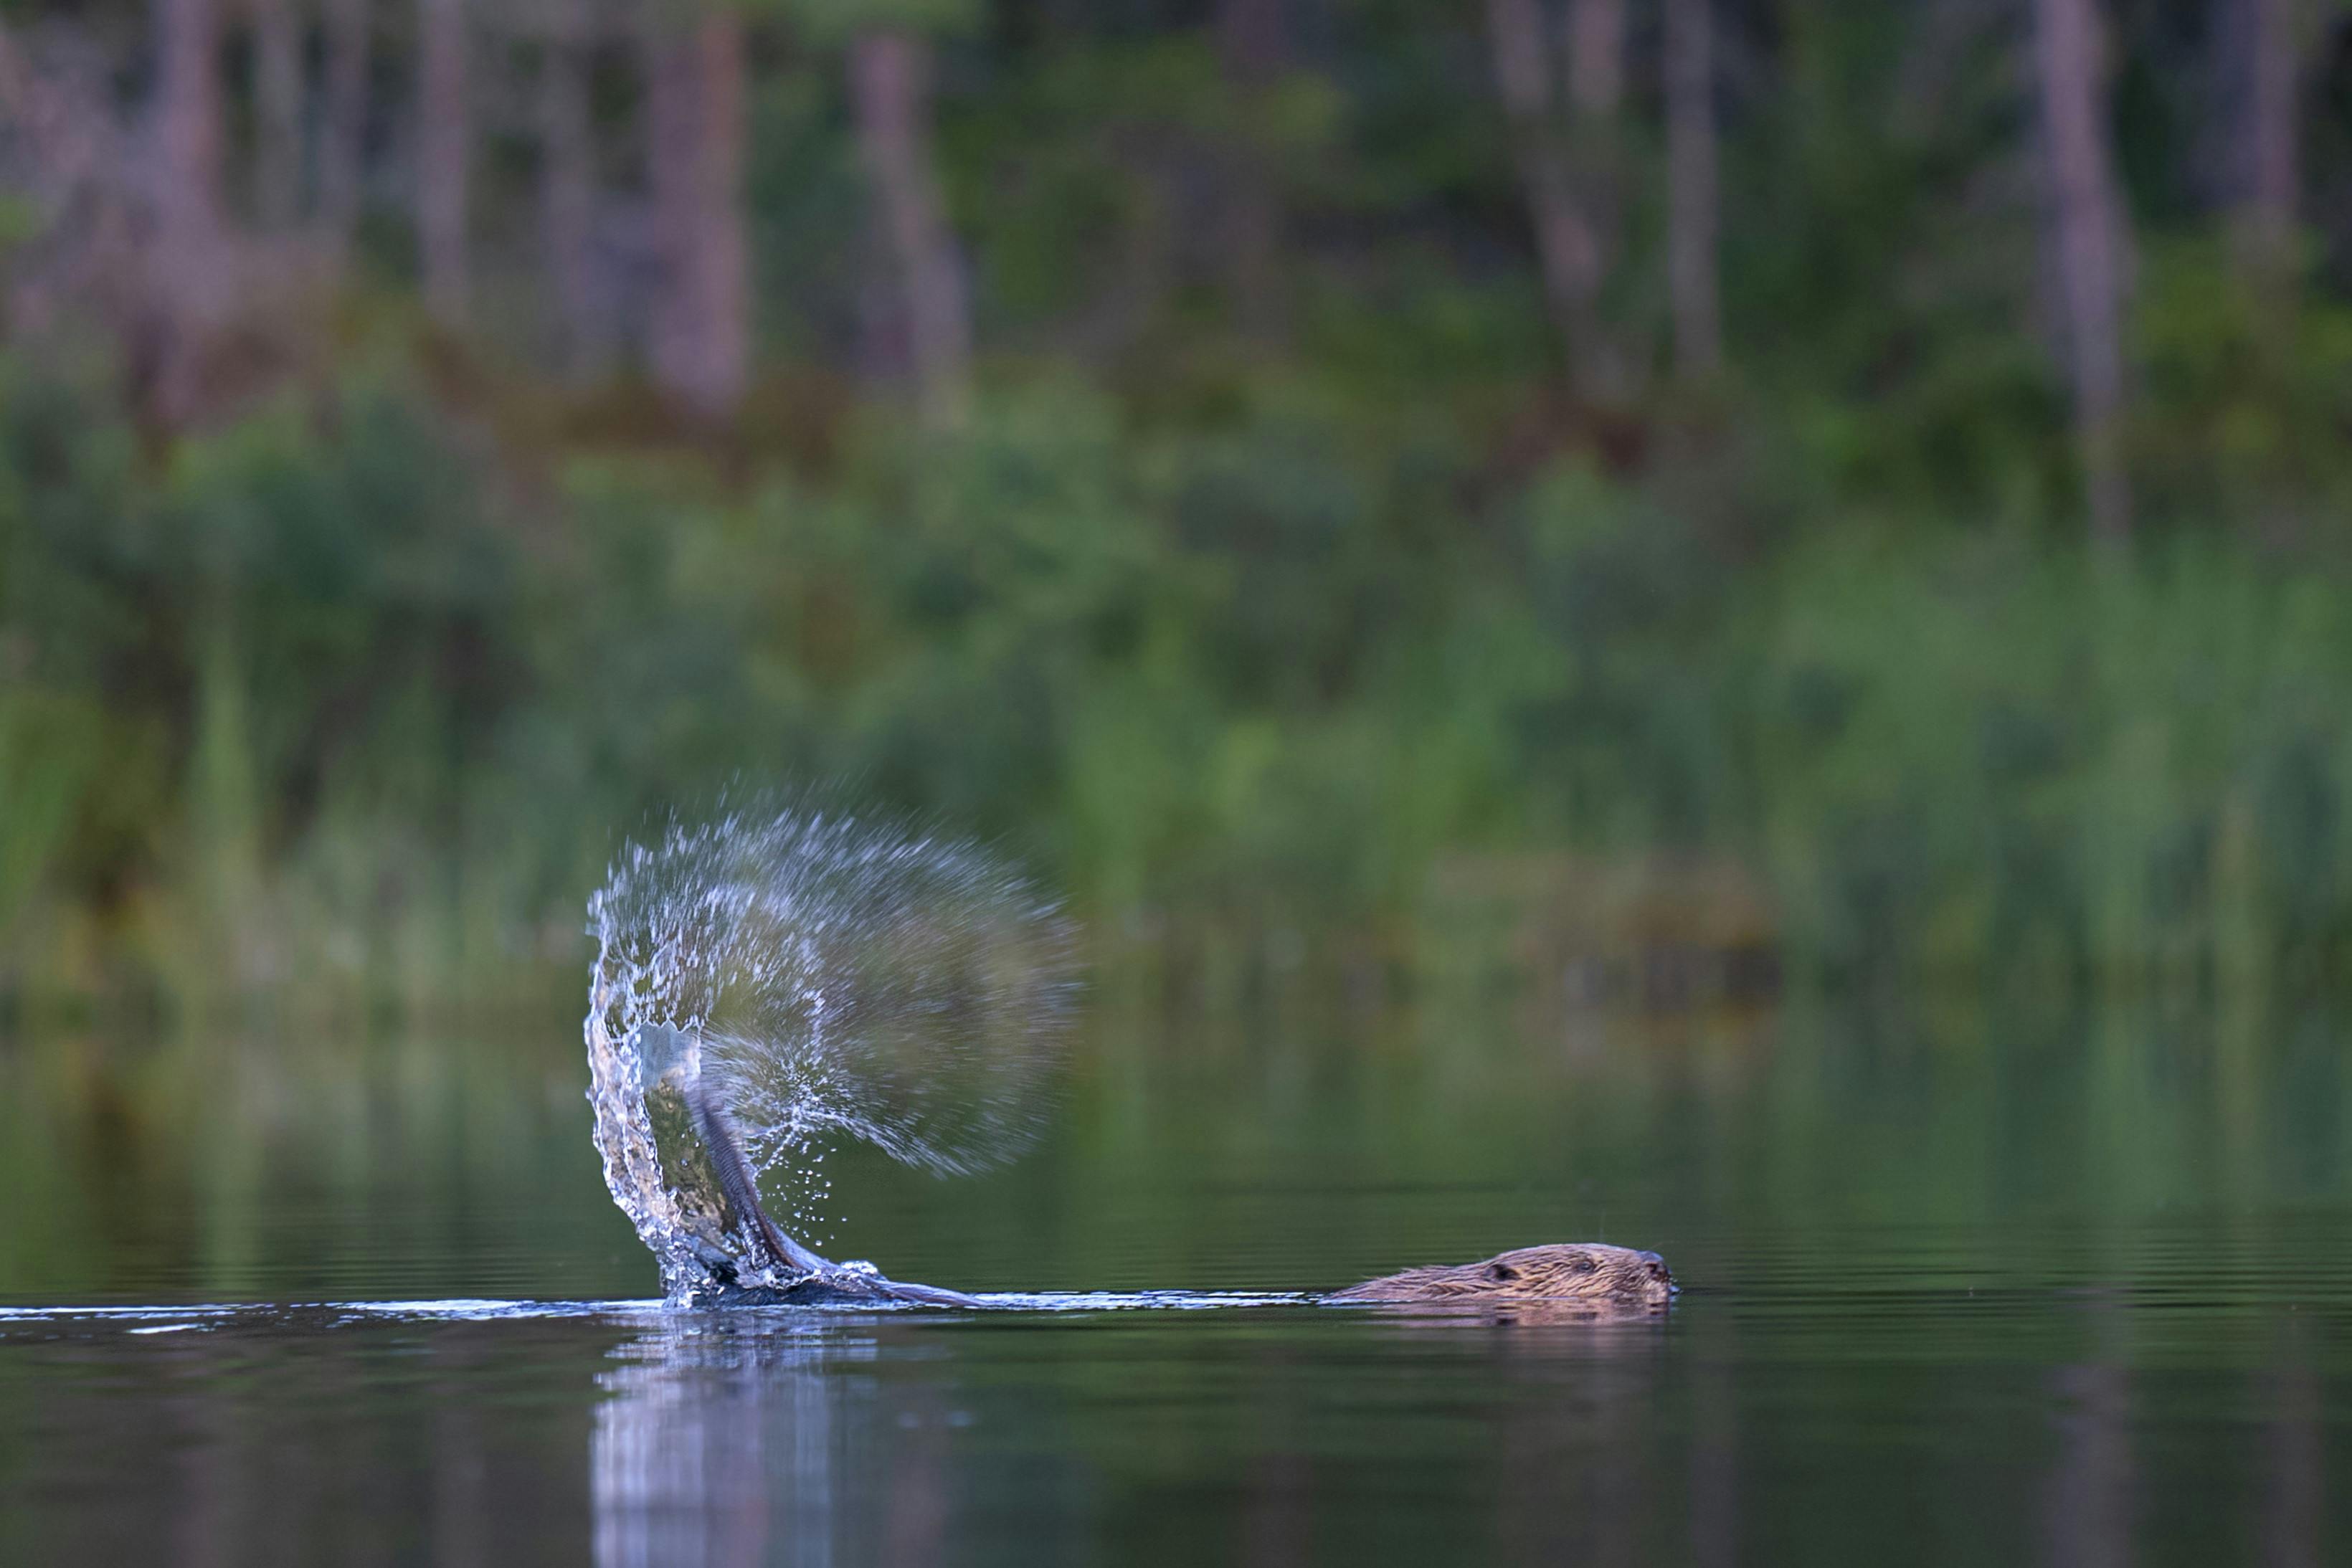 Beaver smacking its tail into the water surface sending dropplets into the air, photograped during beaver safari in Sweden by Nordic Discovery.